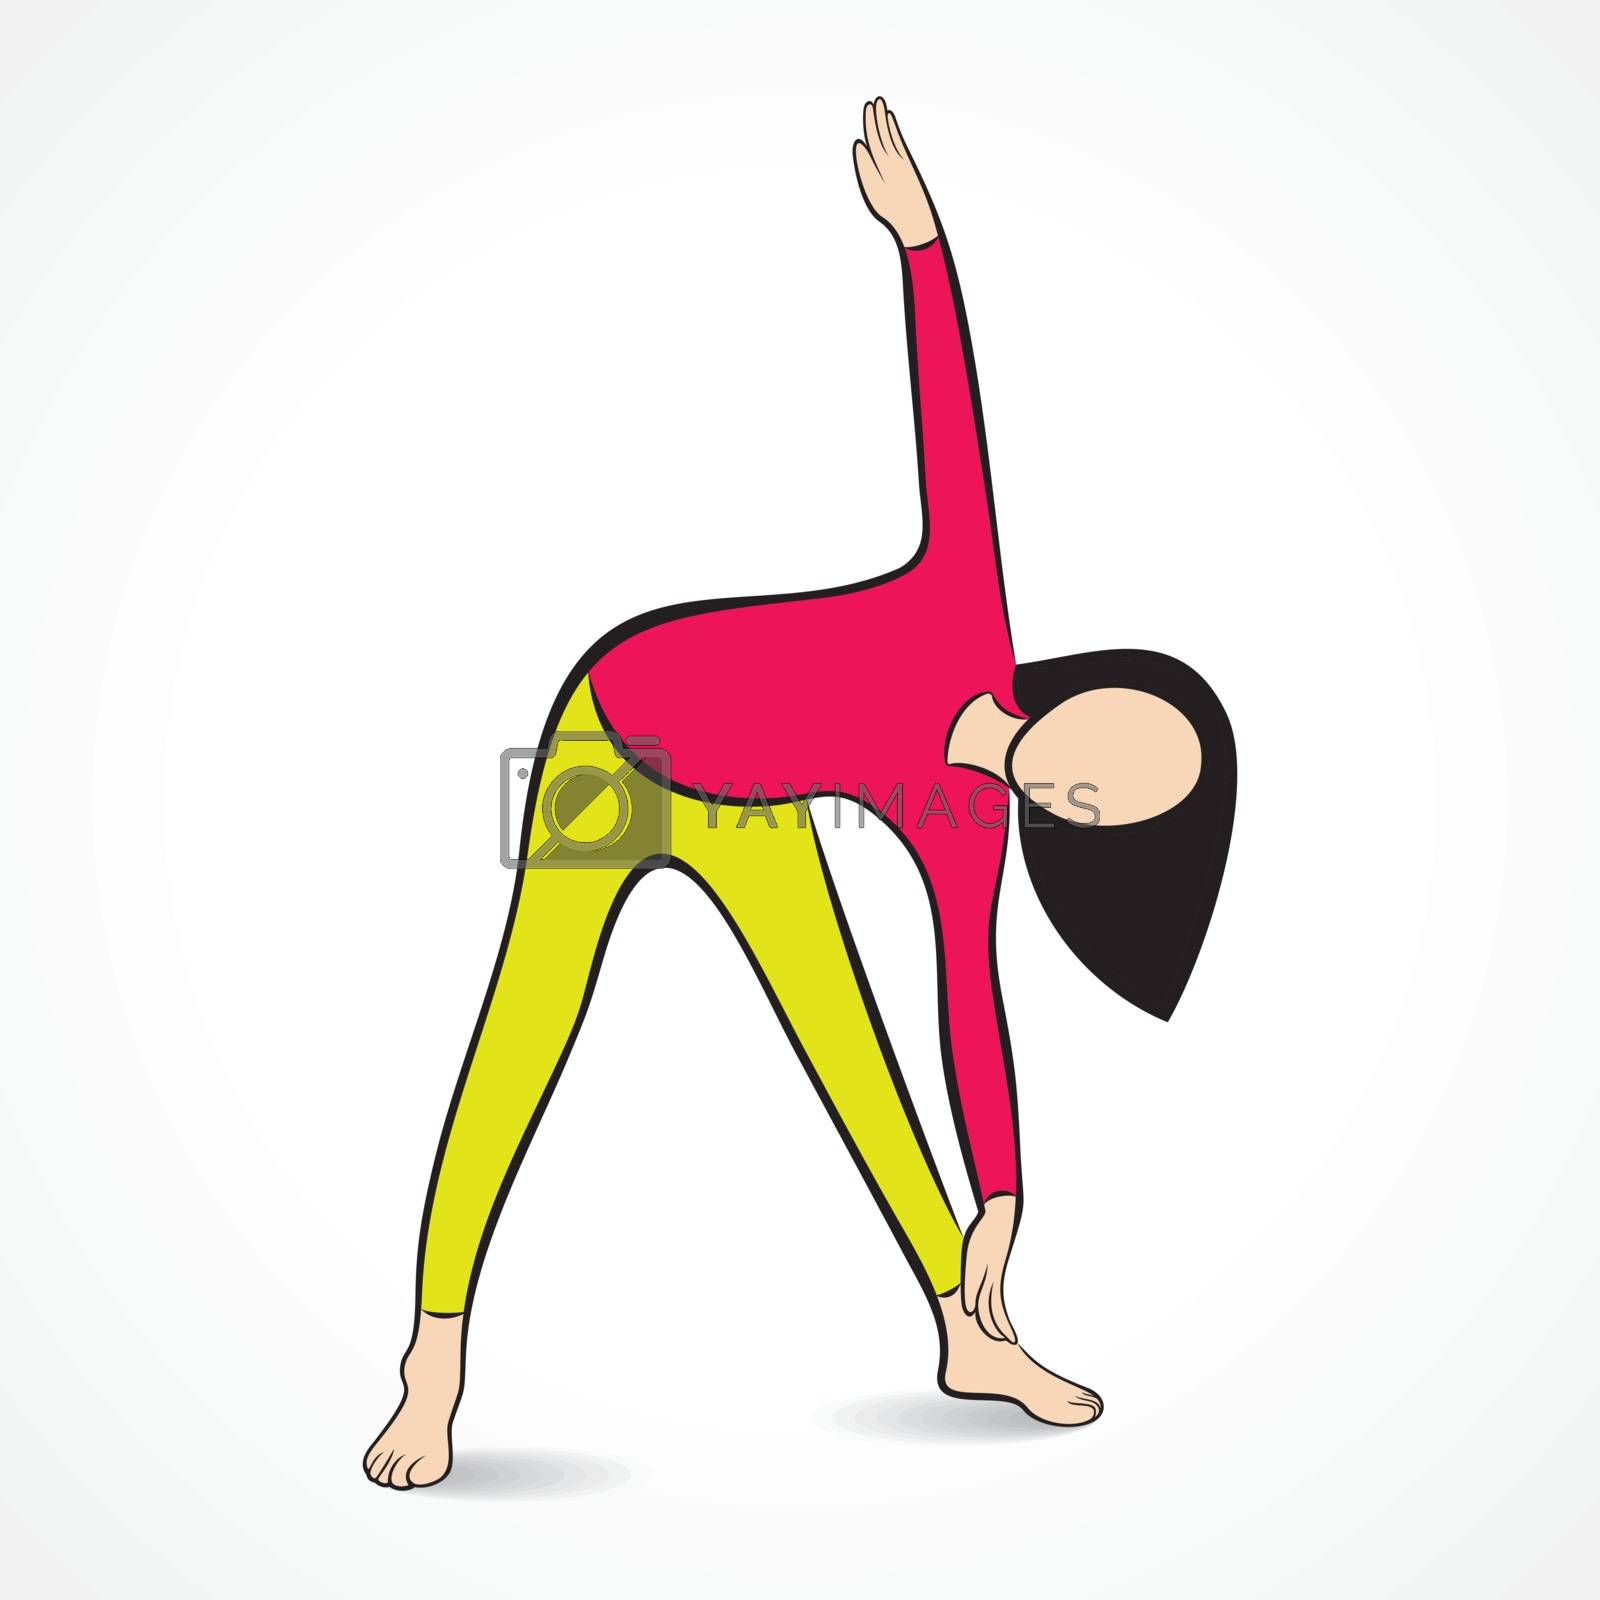 Royalty free image of illustration of woman International Yoga Day by graphicsdunia4you